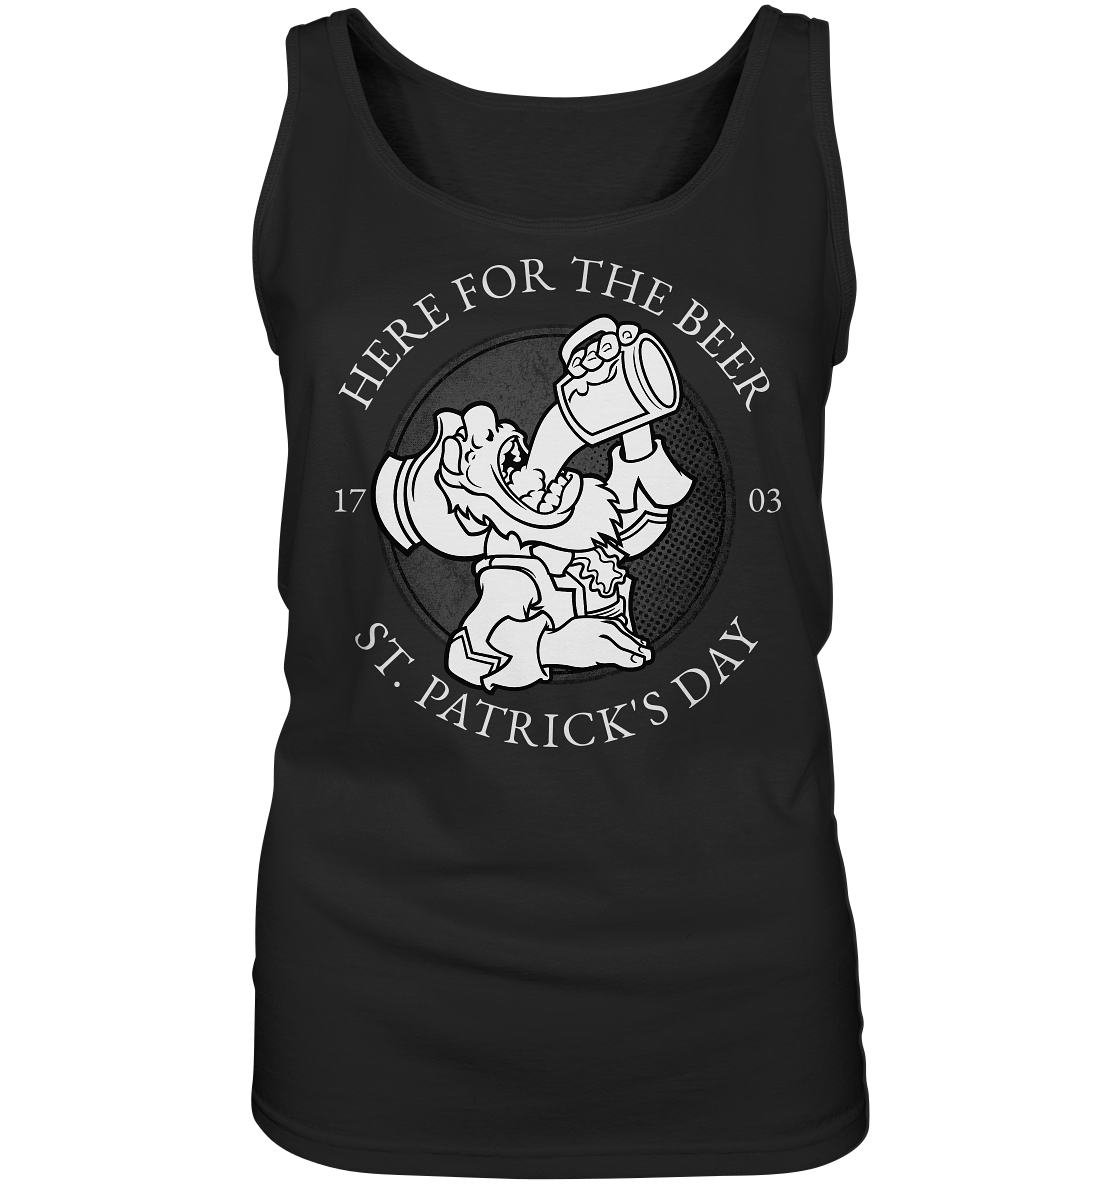 Here For The Beer "St. Patrick's Day" - Ladies Tank-Top